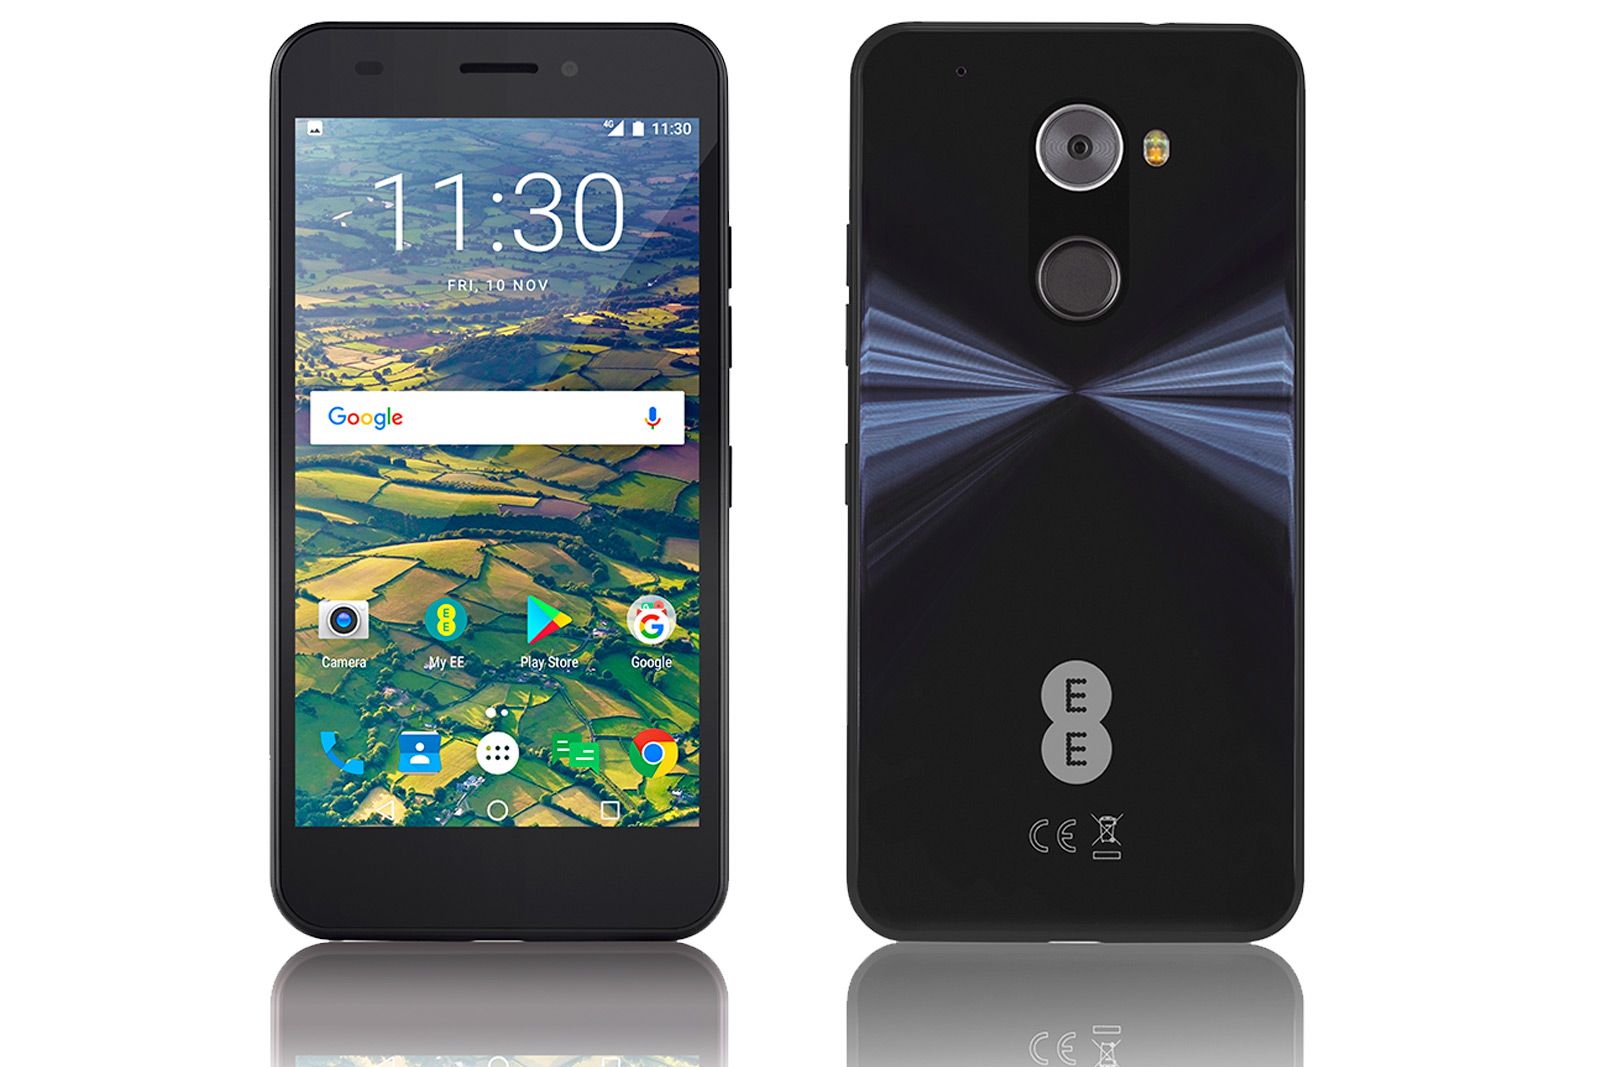 EE Hawk is a £150 smartphone capable of 300mbps download speeds image 2